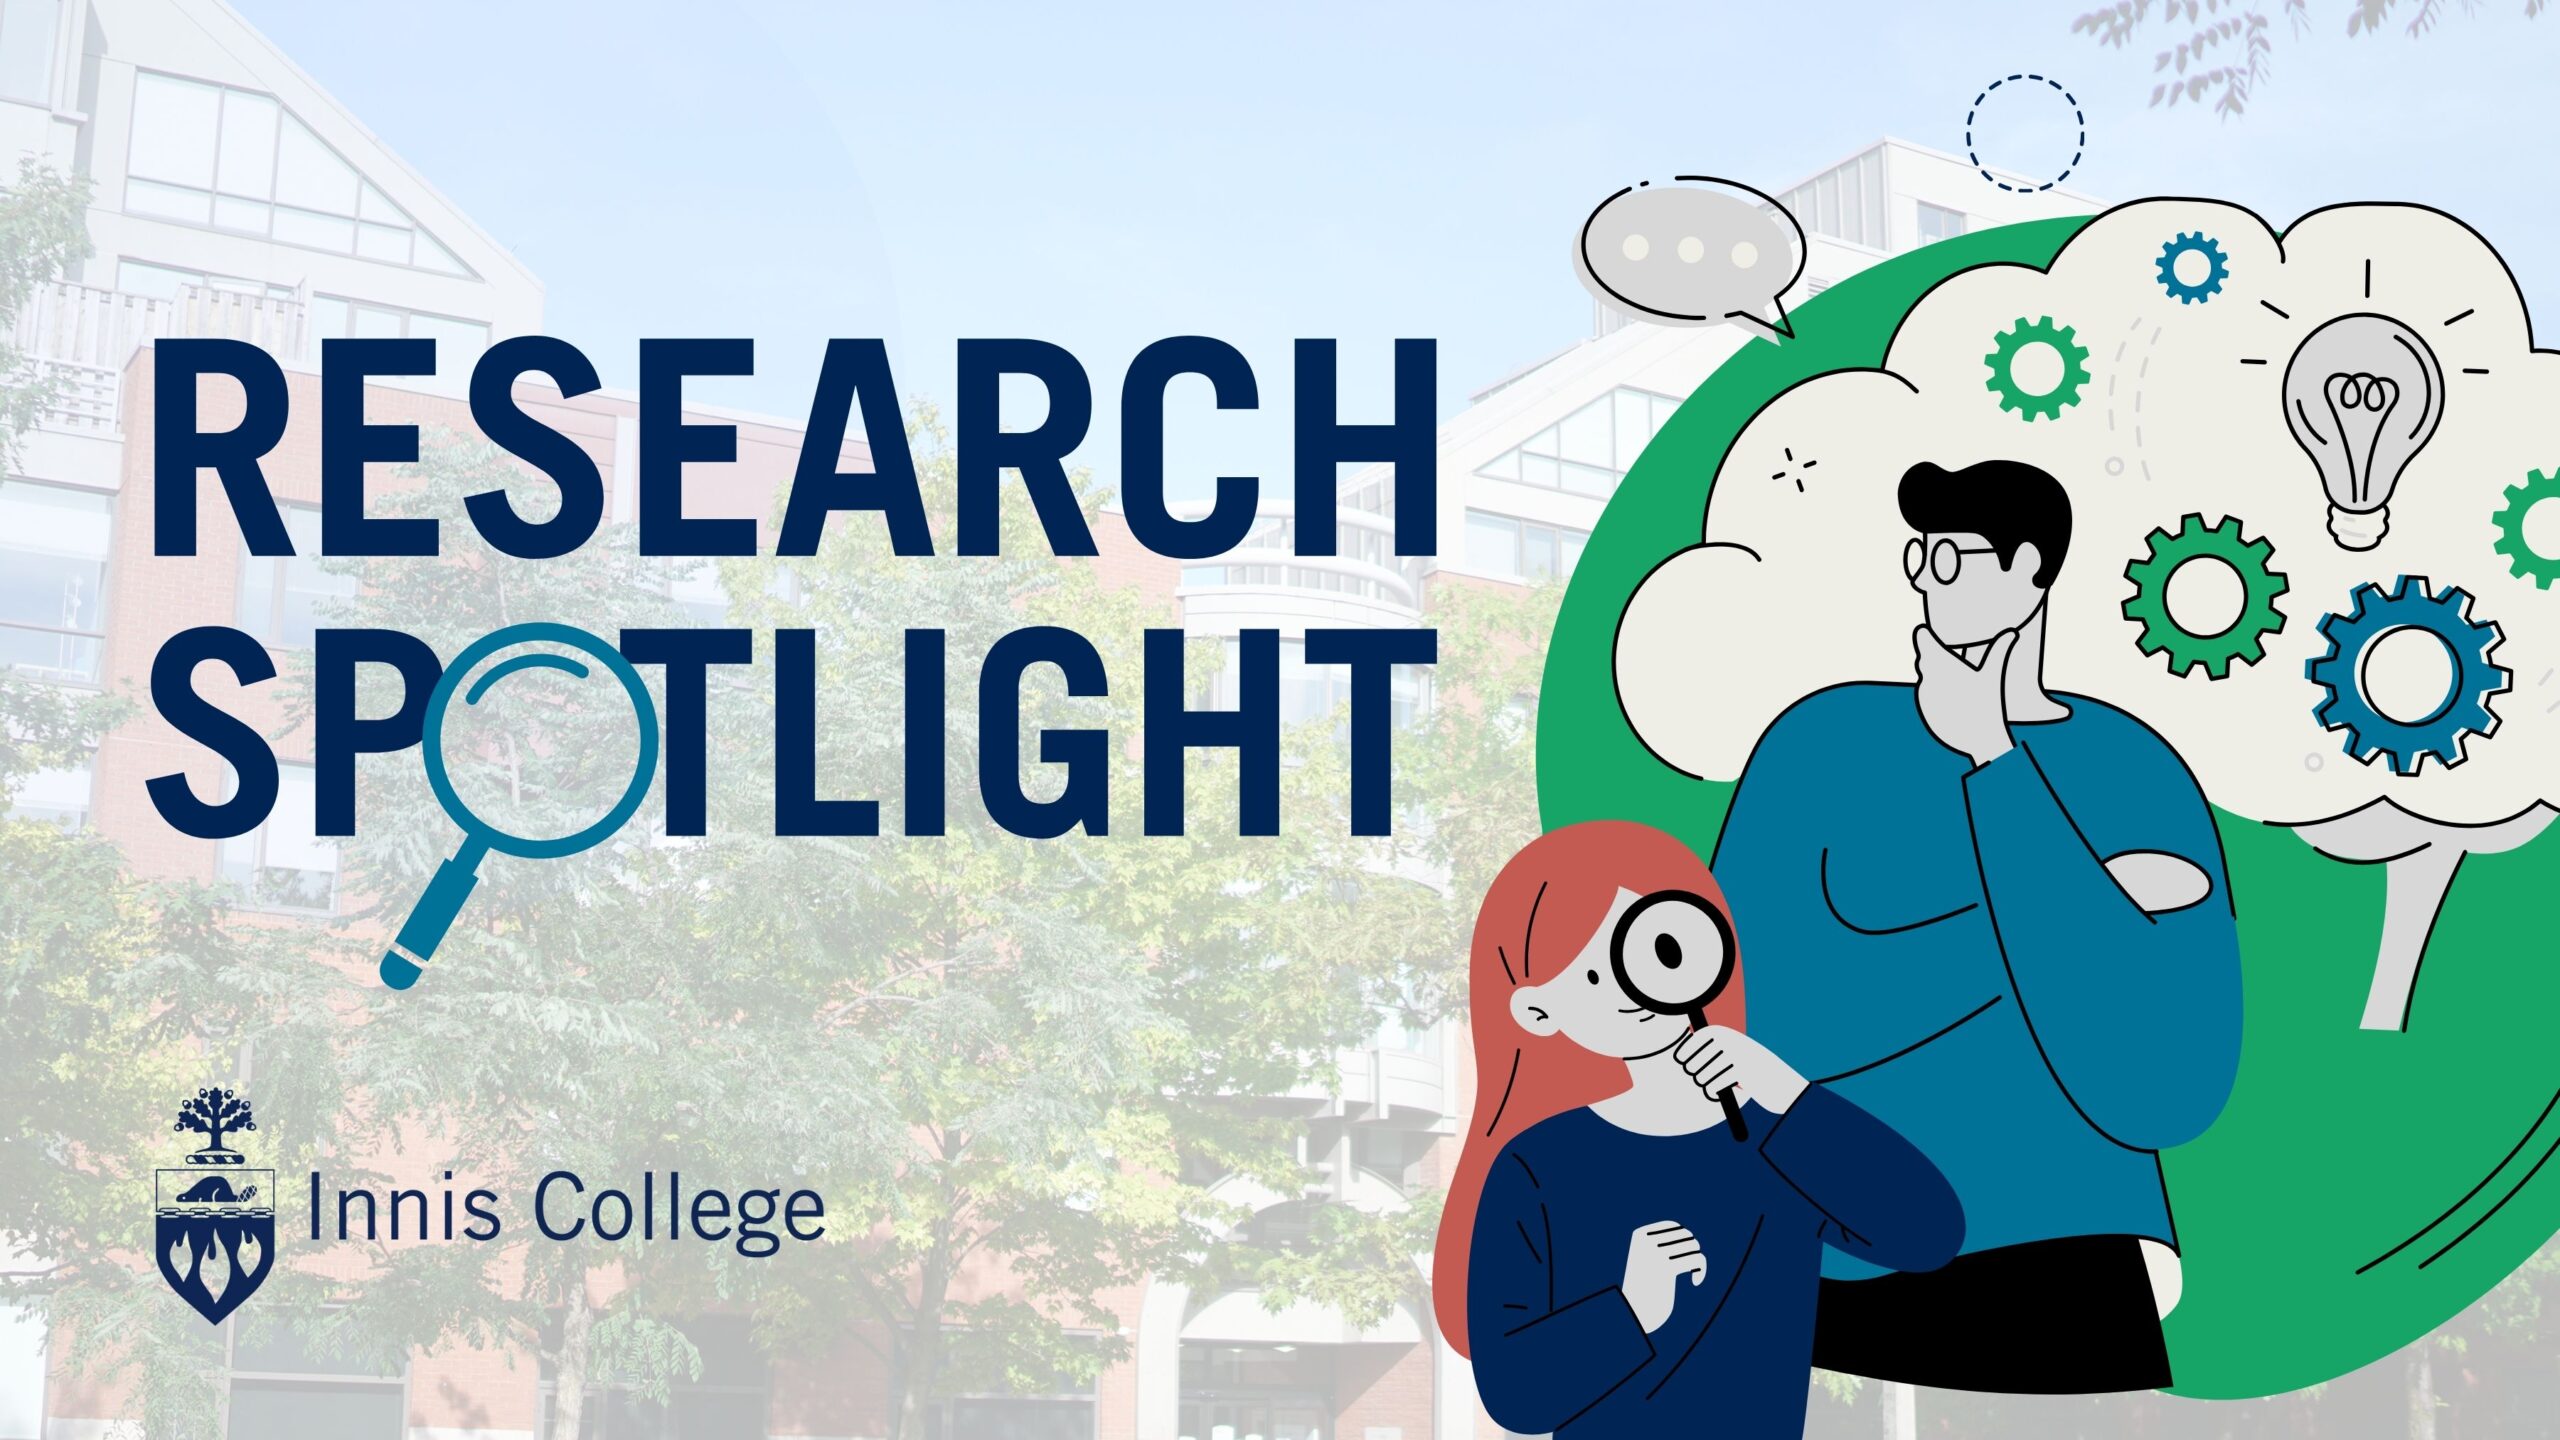 decorative event header image with the words "research spotlight"